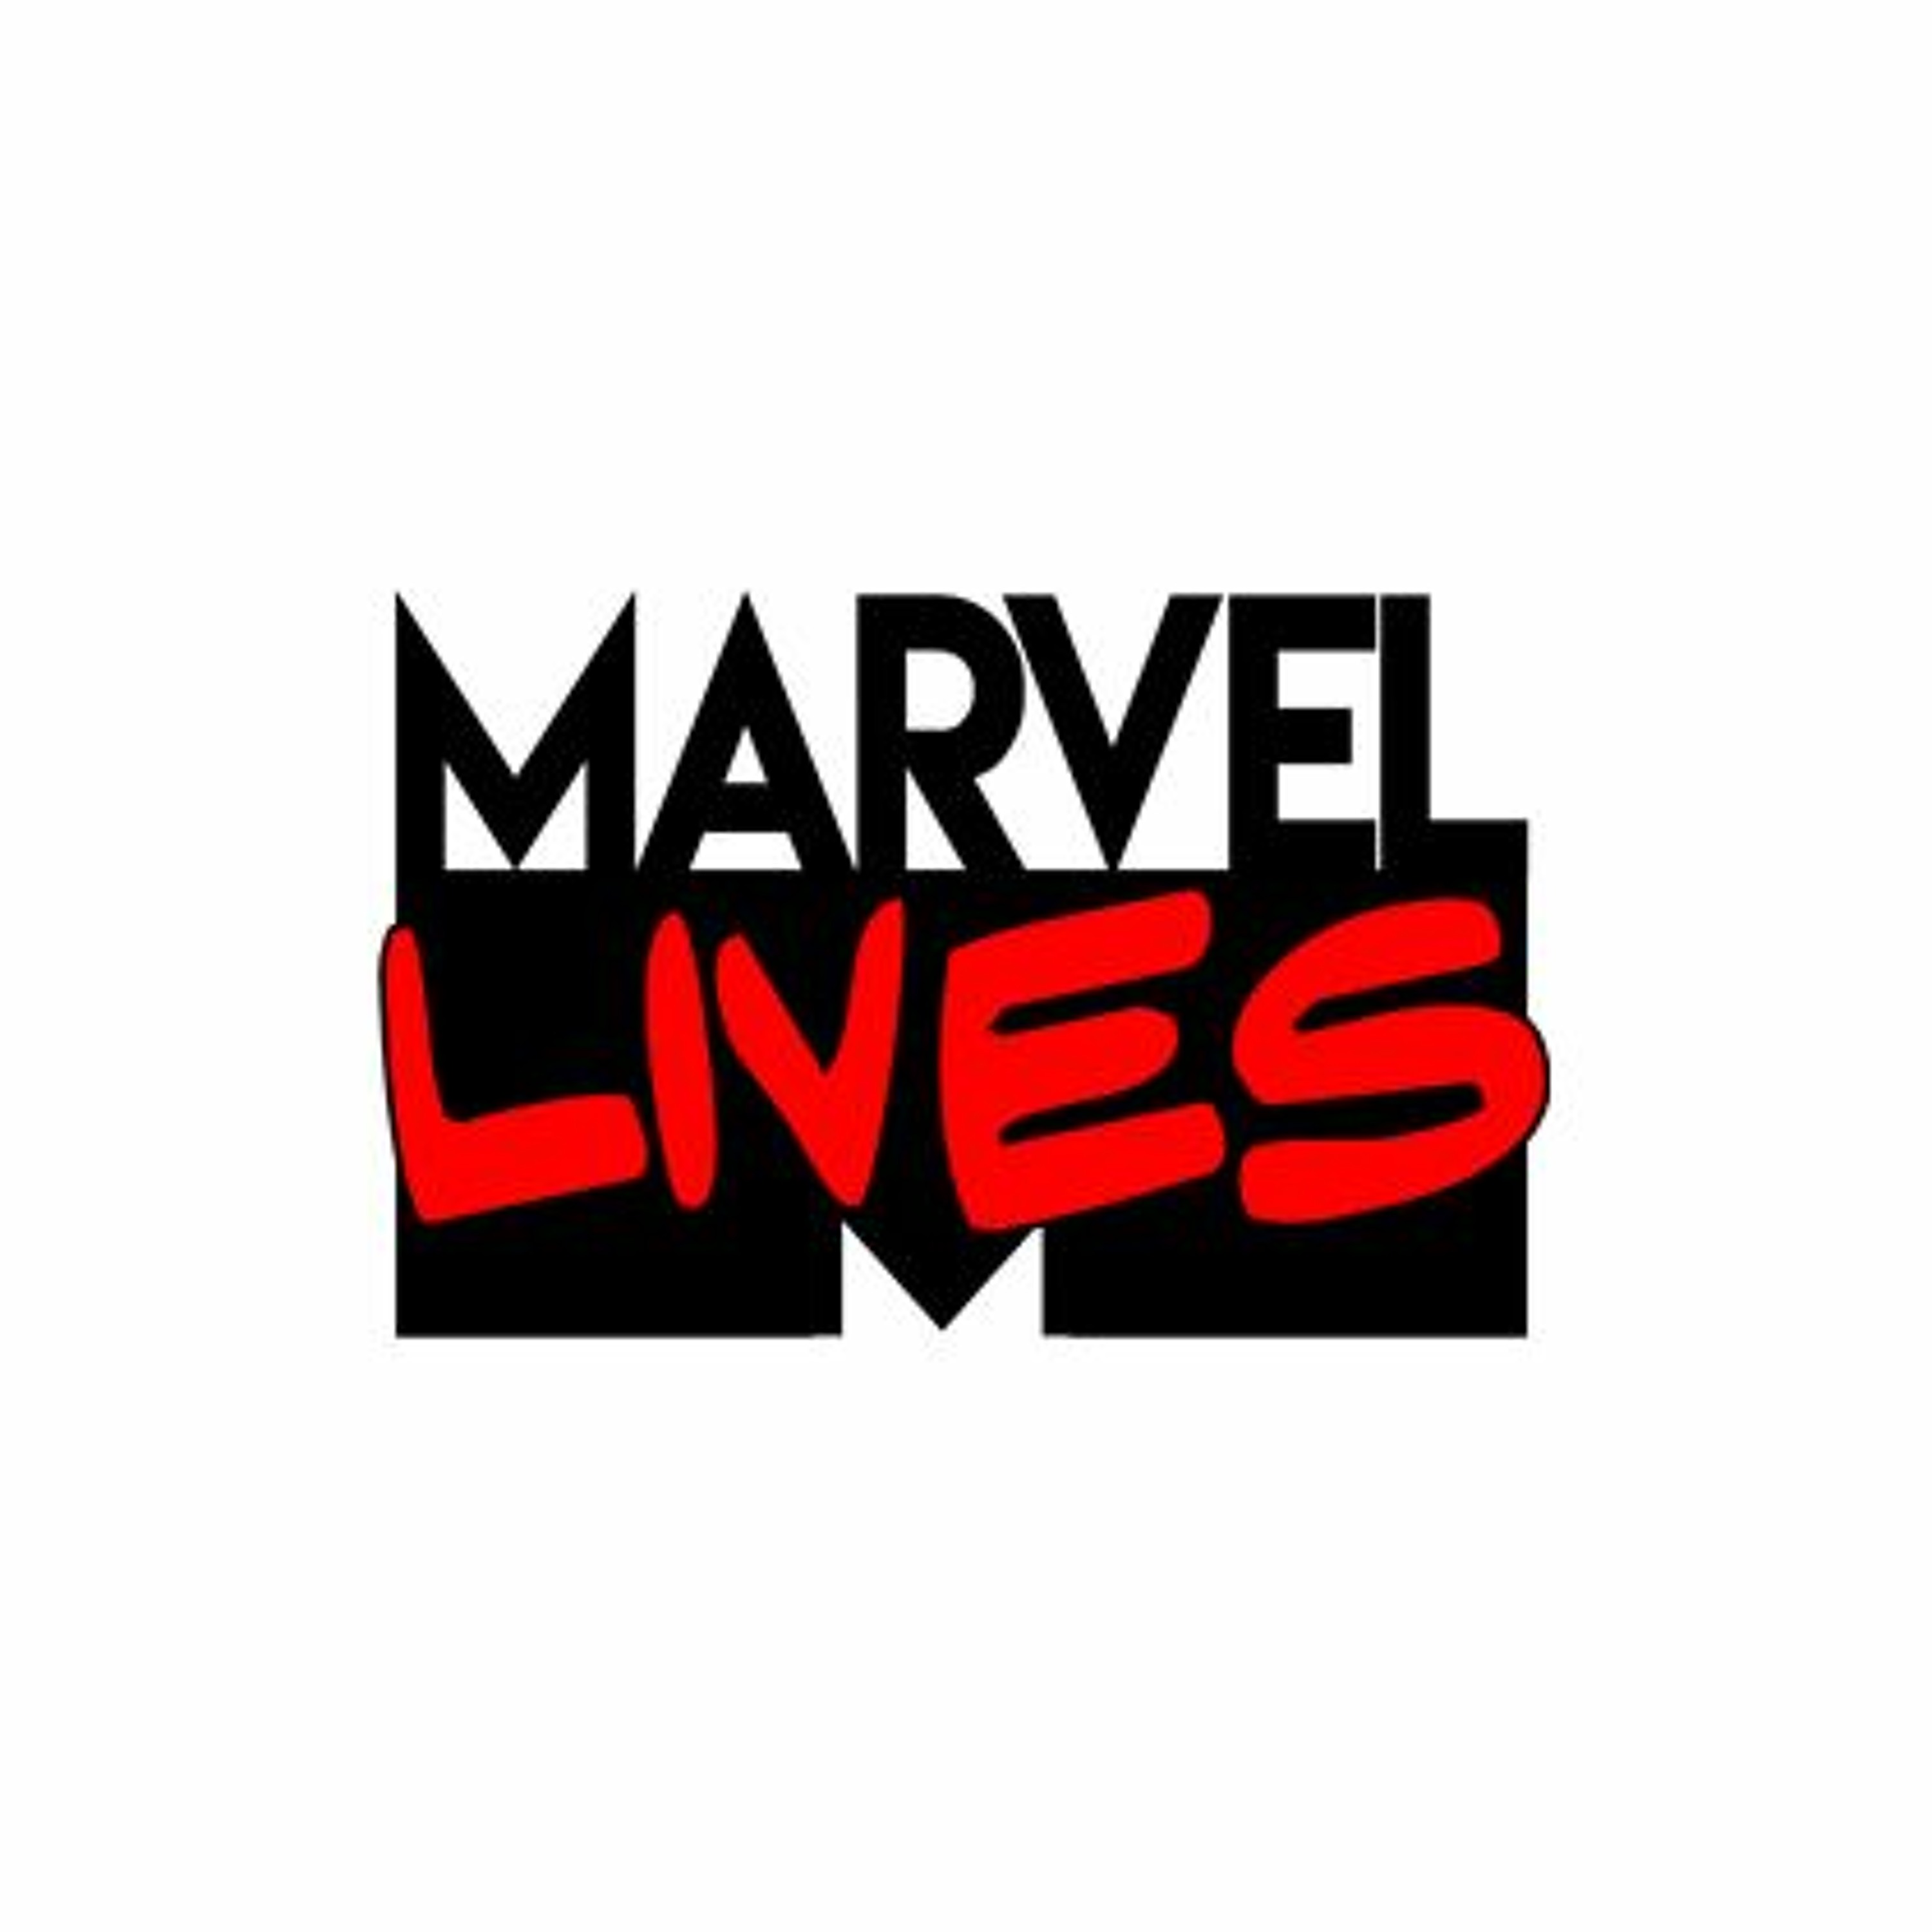 Marvel Lives #2 - Undefeated 2018 recap, CEO 2018 ahead, and ZERO